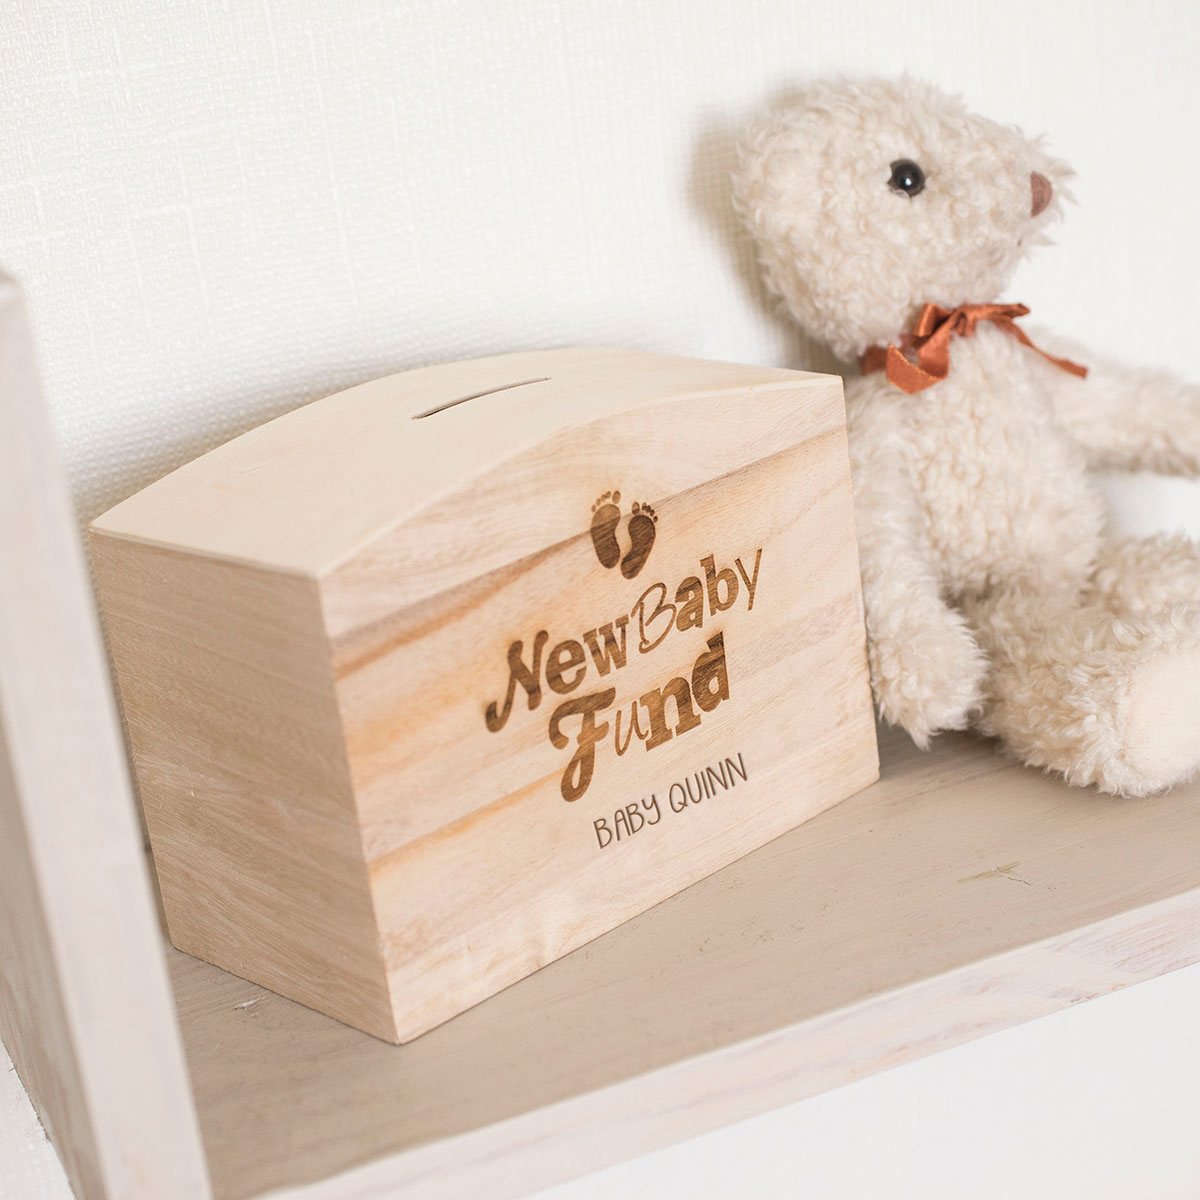 Personalised Wooden Money Box - New Baby Fund